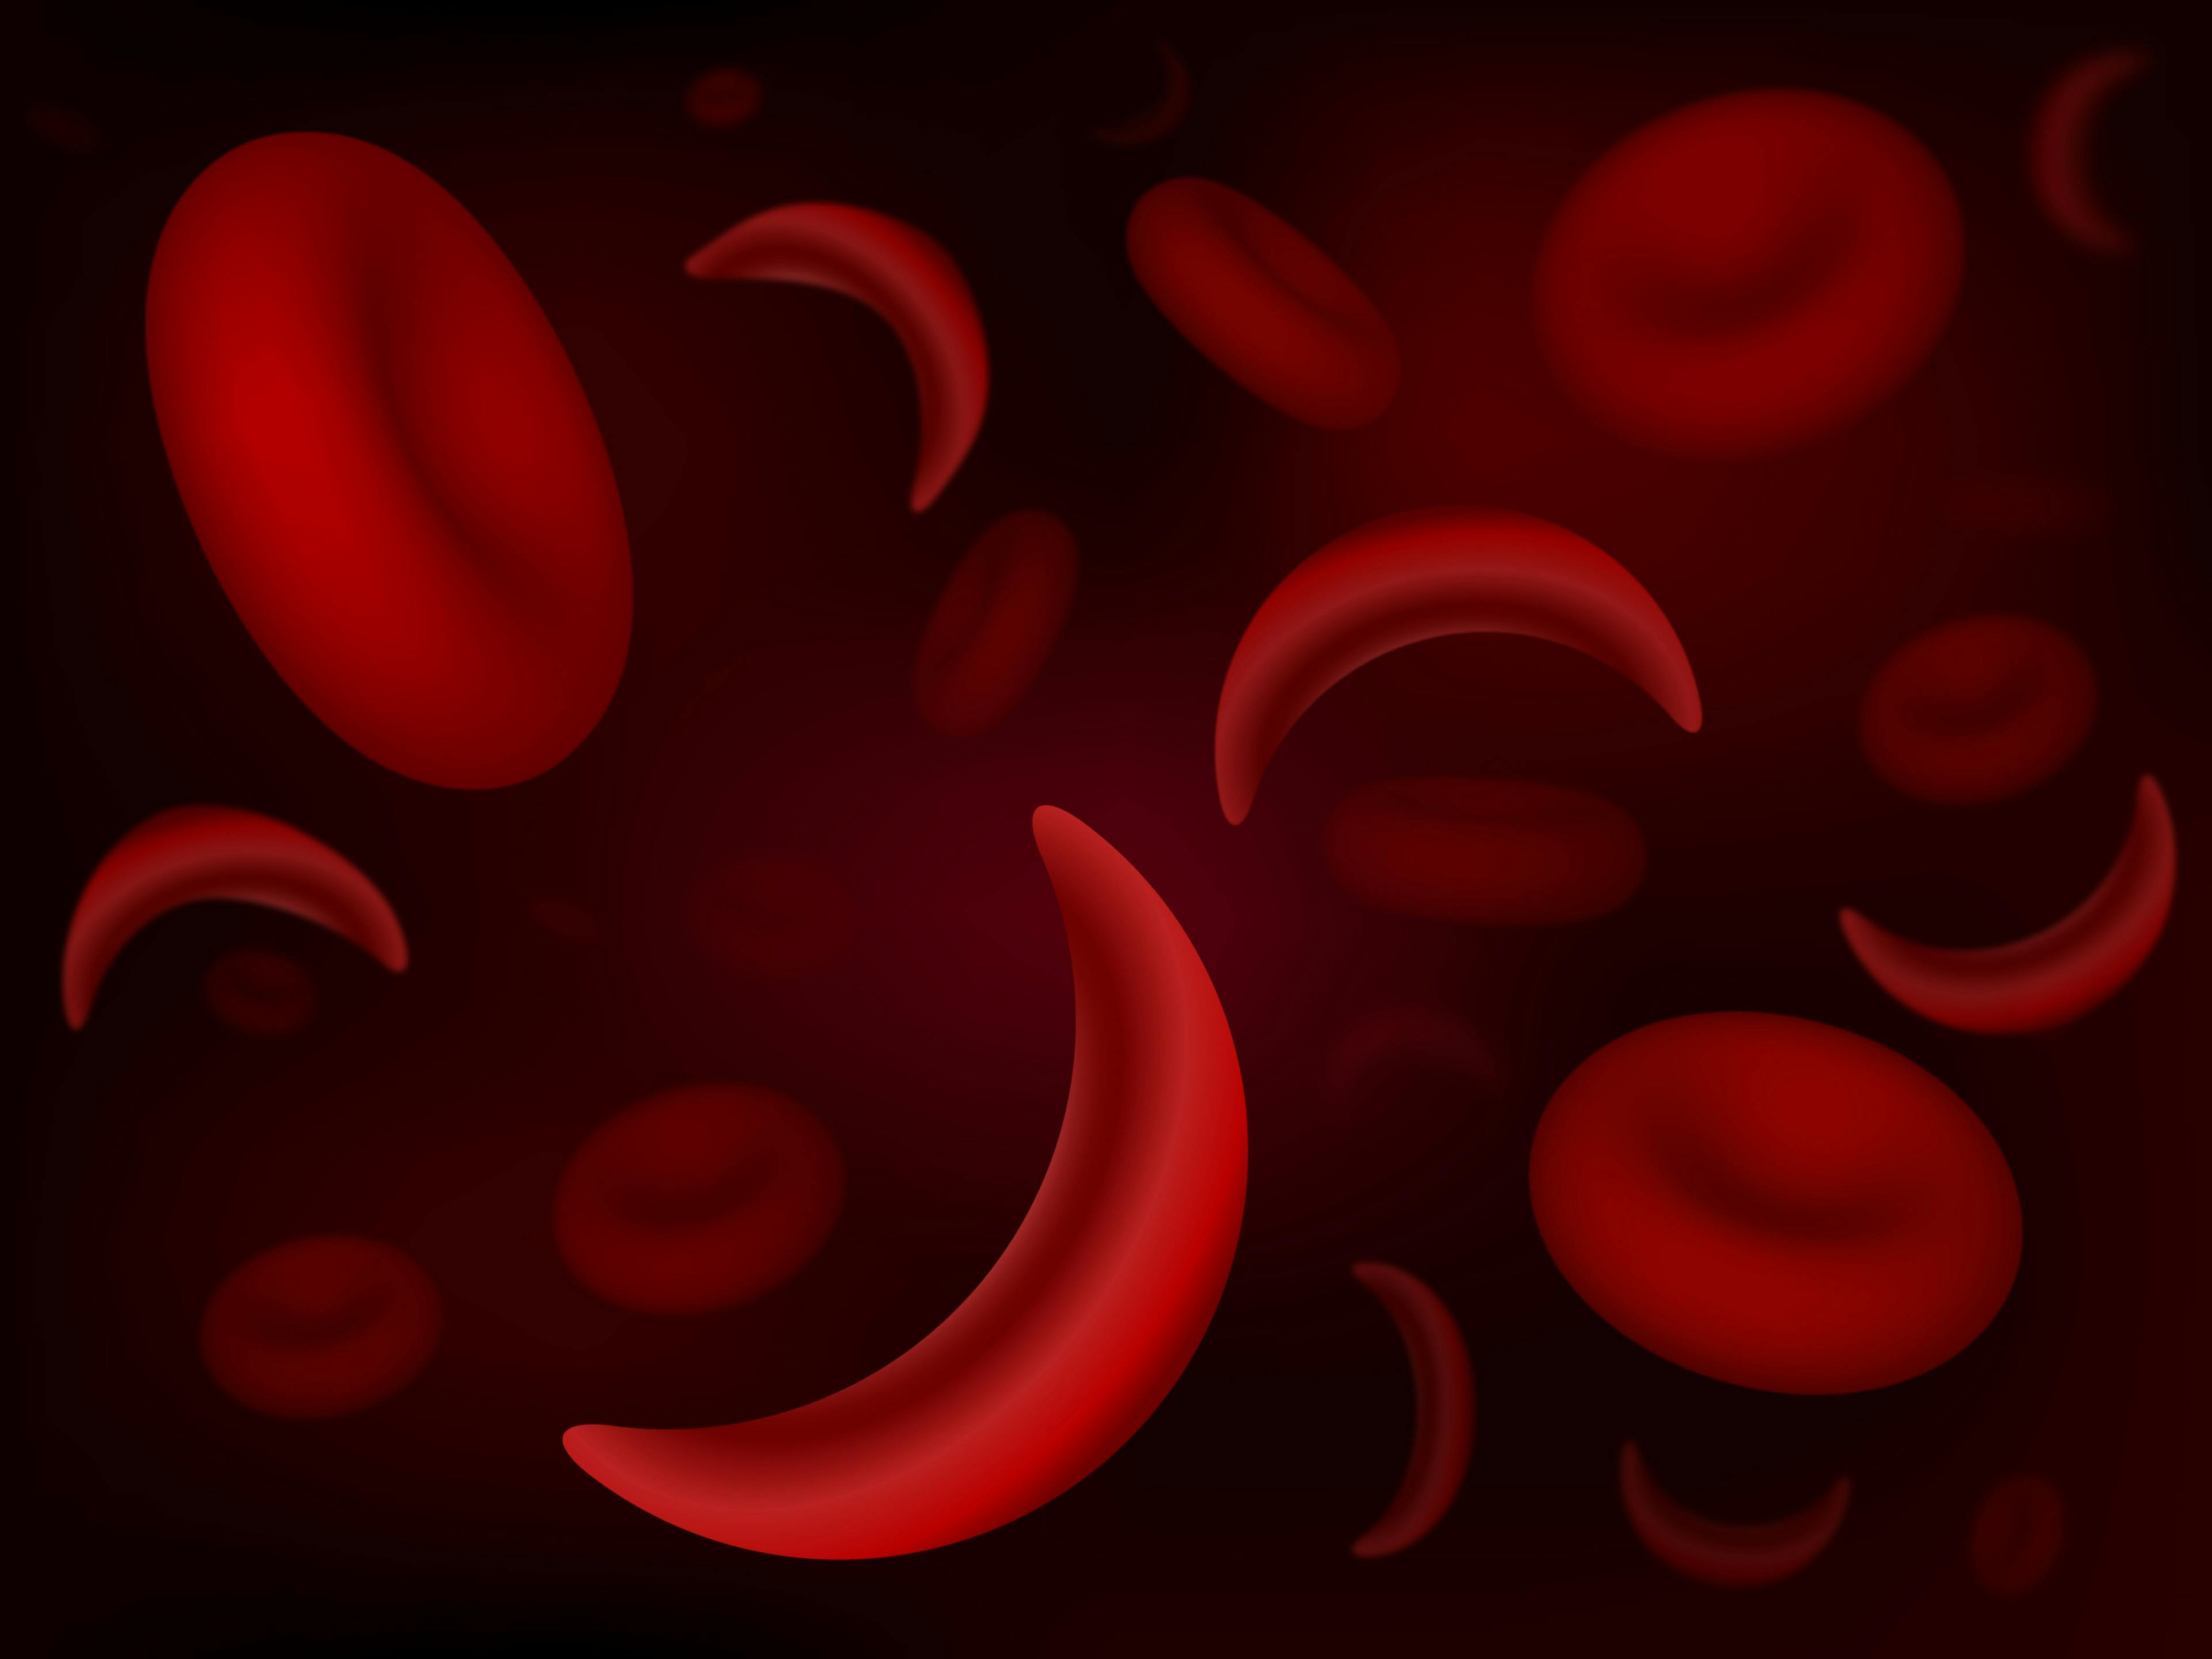 Sickle cell disease blood cells -- Image credit: extender_01 | stock.adobe.com